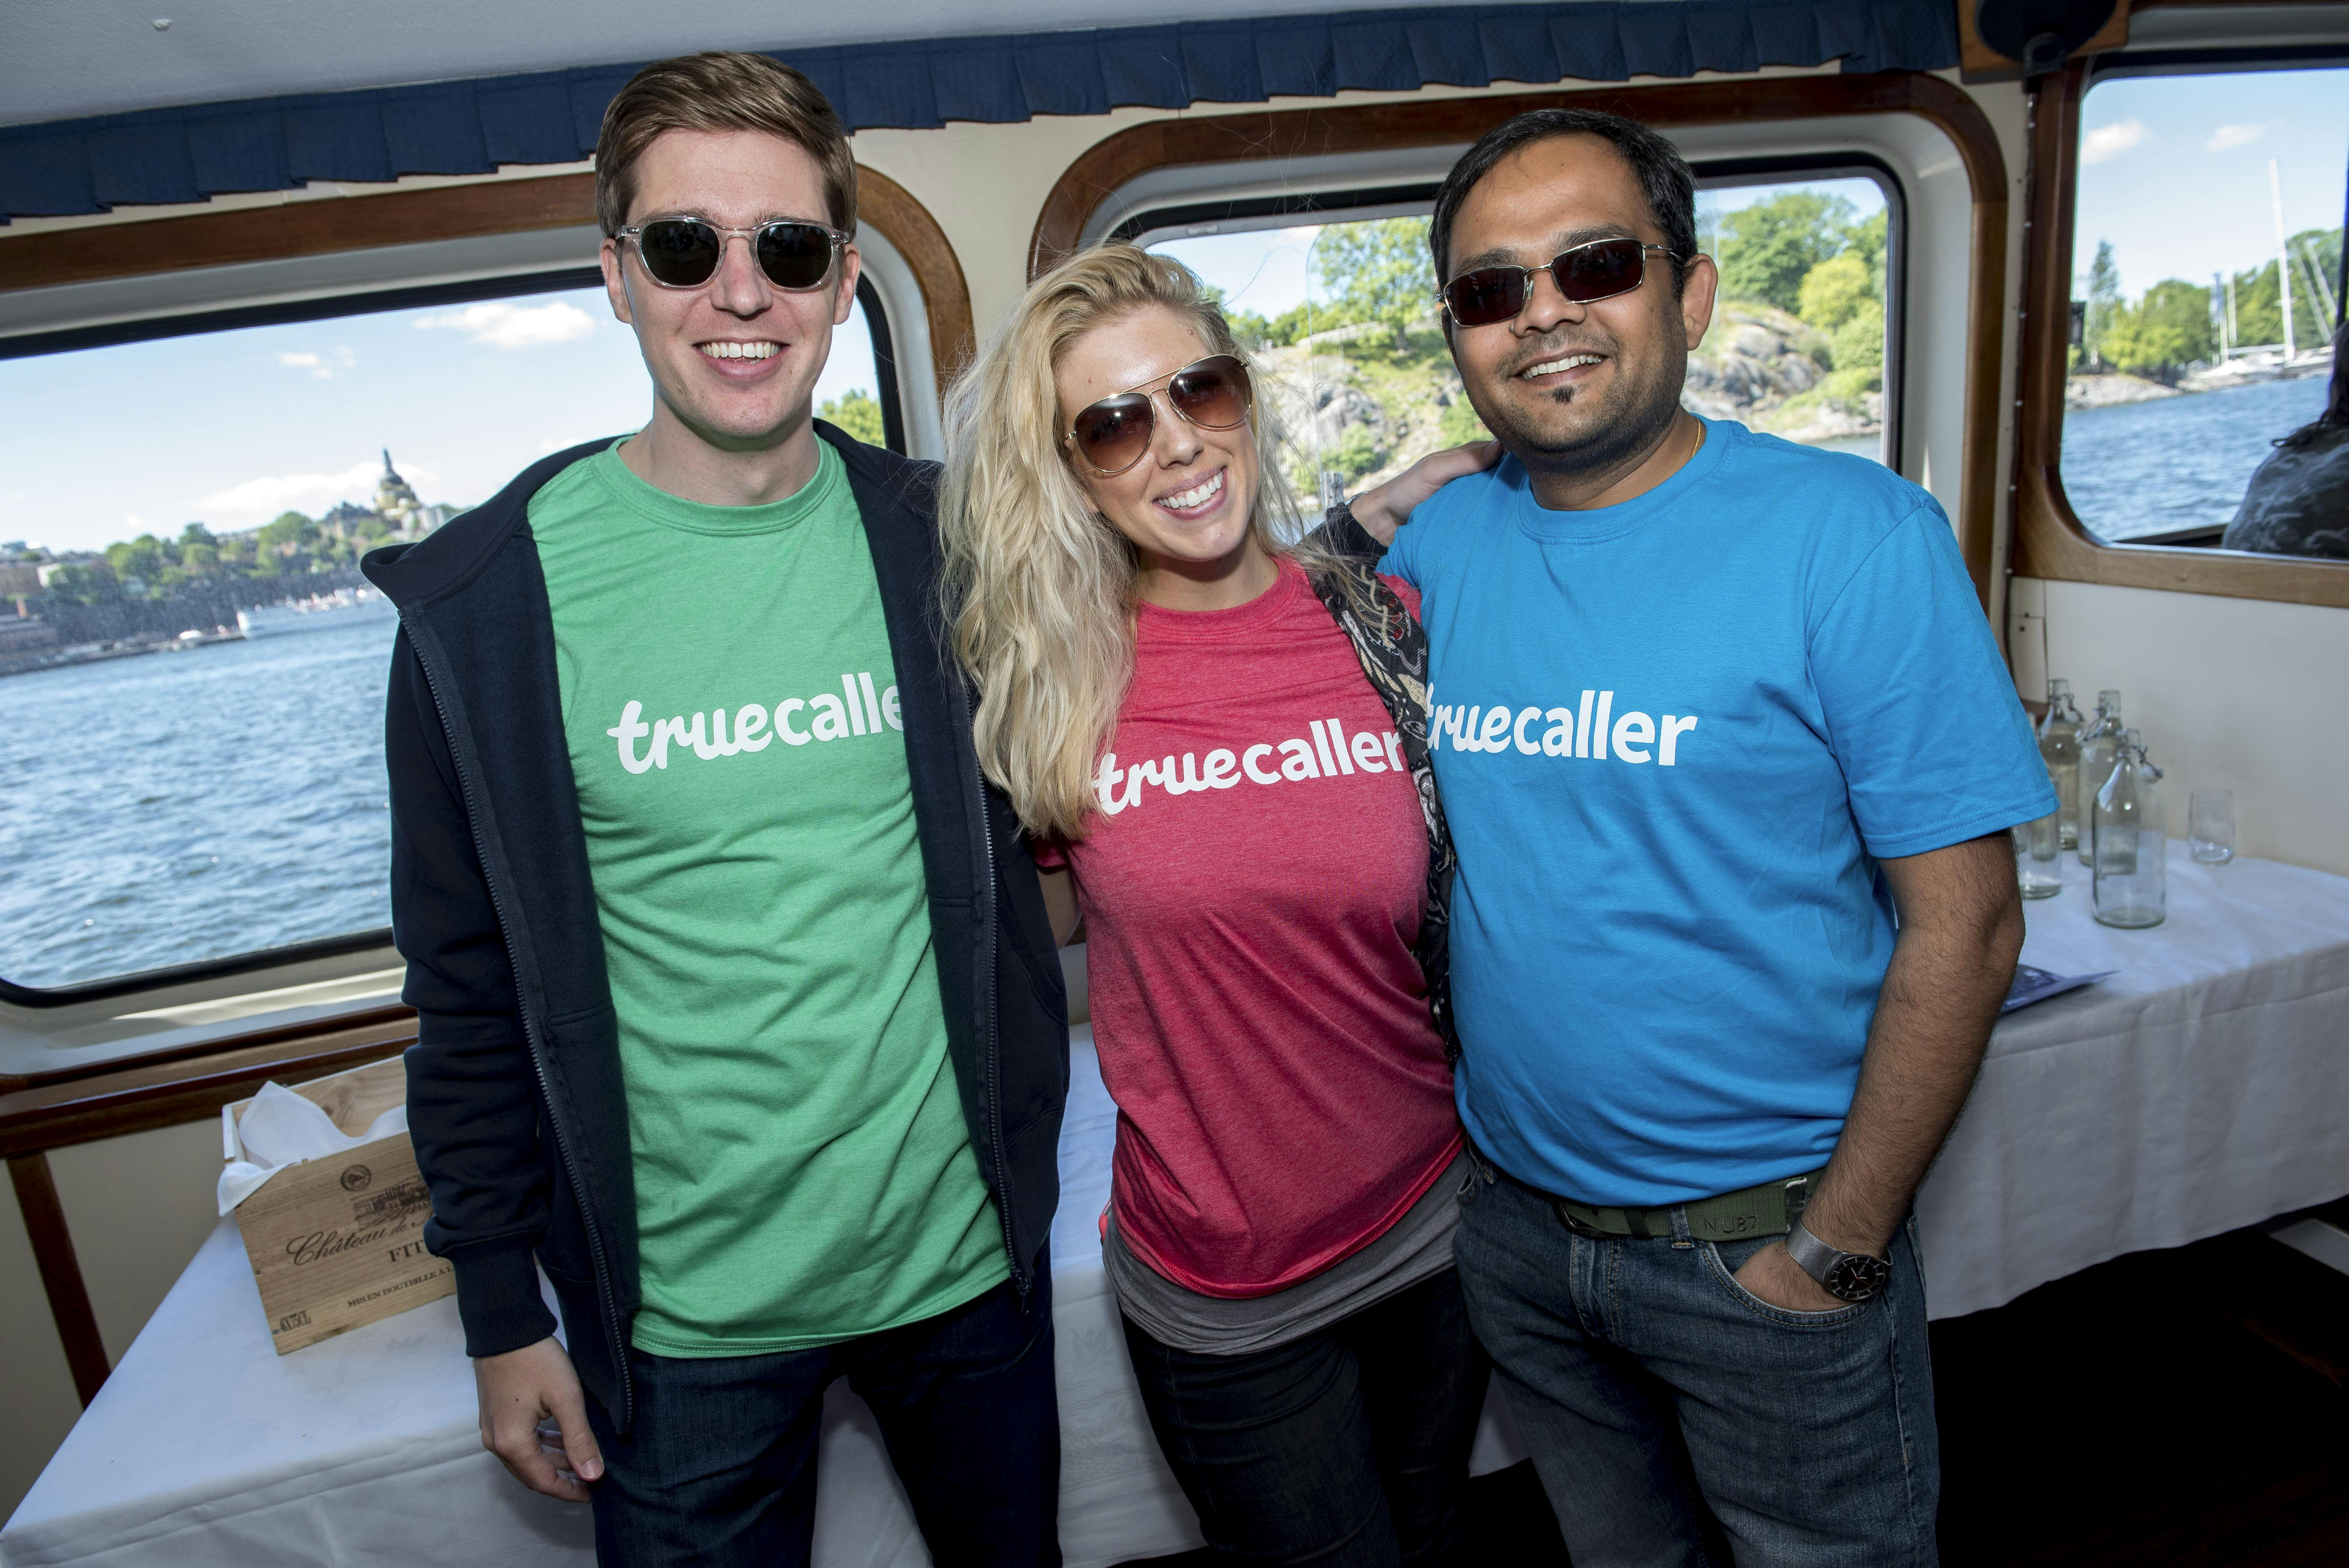 Life as a Director of Brand Marketing at Truecaller